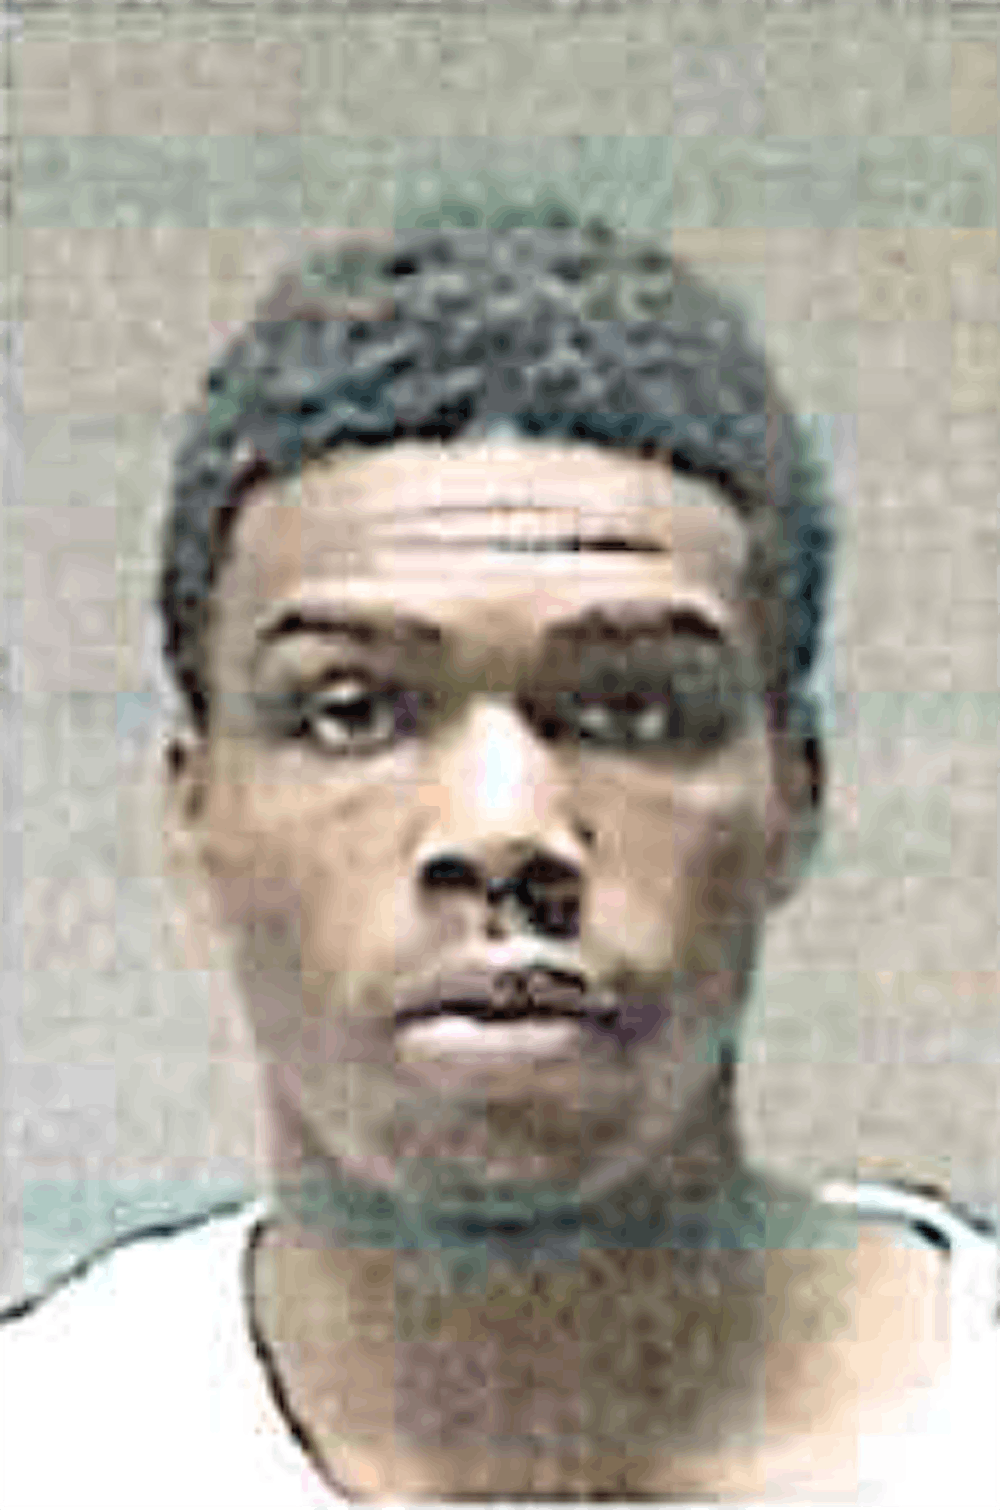 Muncie man arrested after stealing a car from BSU parking garage, running from police